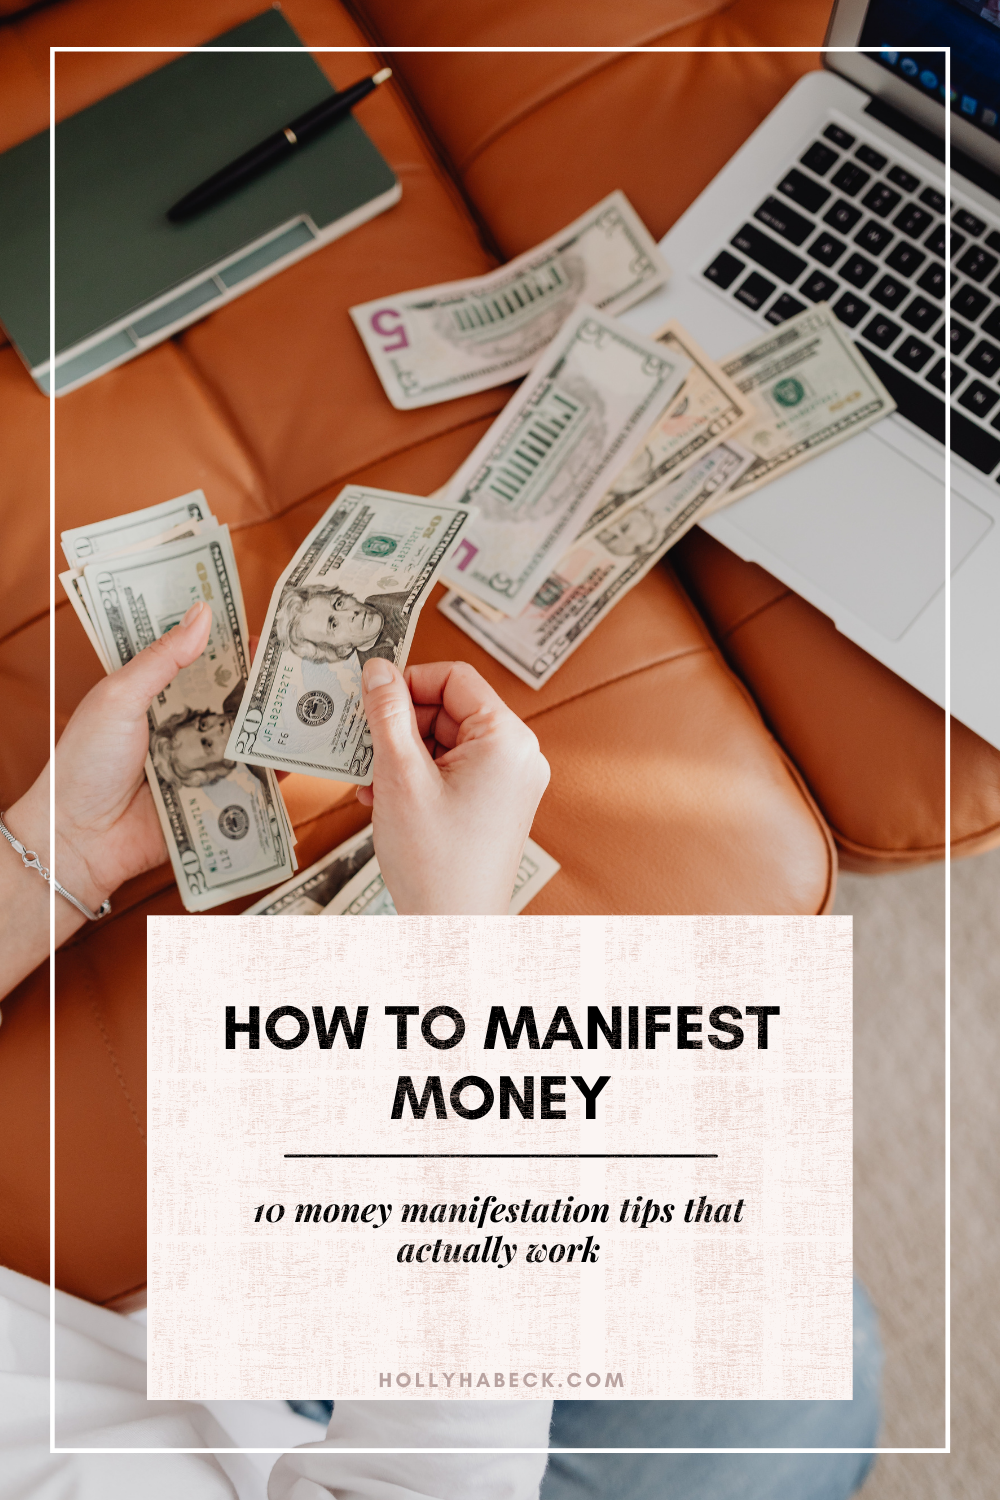 10 Awesome Tips About Wealth Manifestation From Unlikely Websites